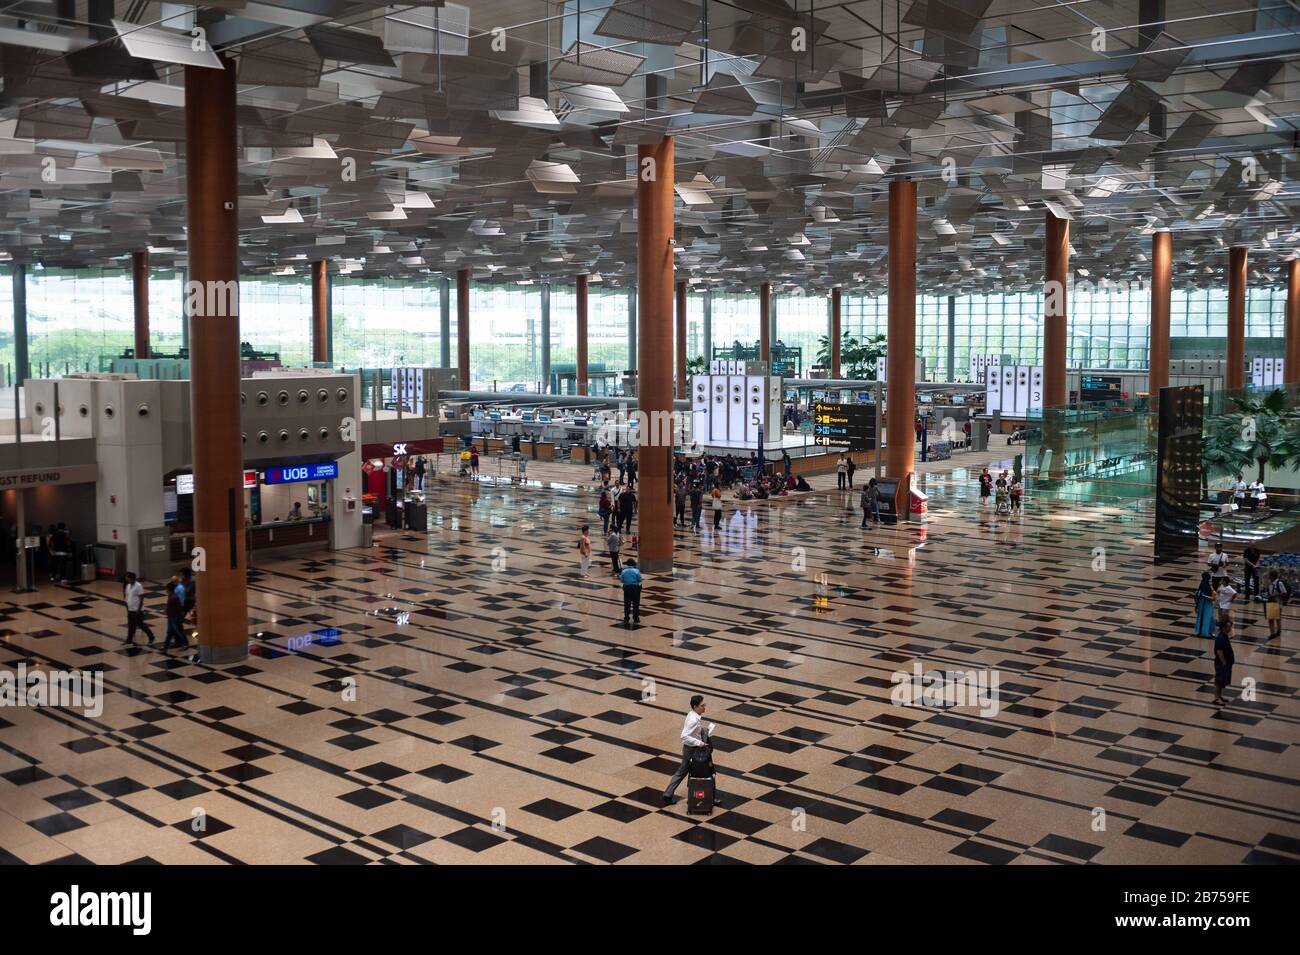 01.03.2019, Singapore, Republic of Singapore, Asia - A view into the departure hall of Terminal 3 at Changi Airport. [automated translation] Stock Photo